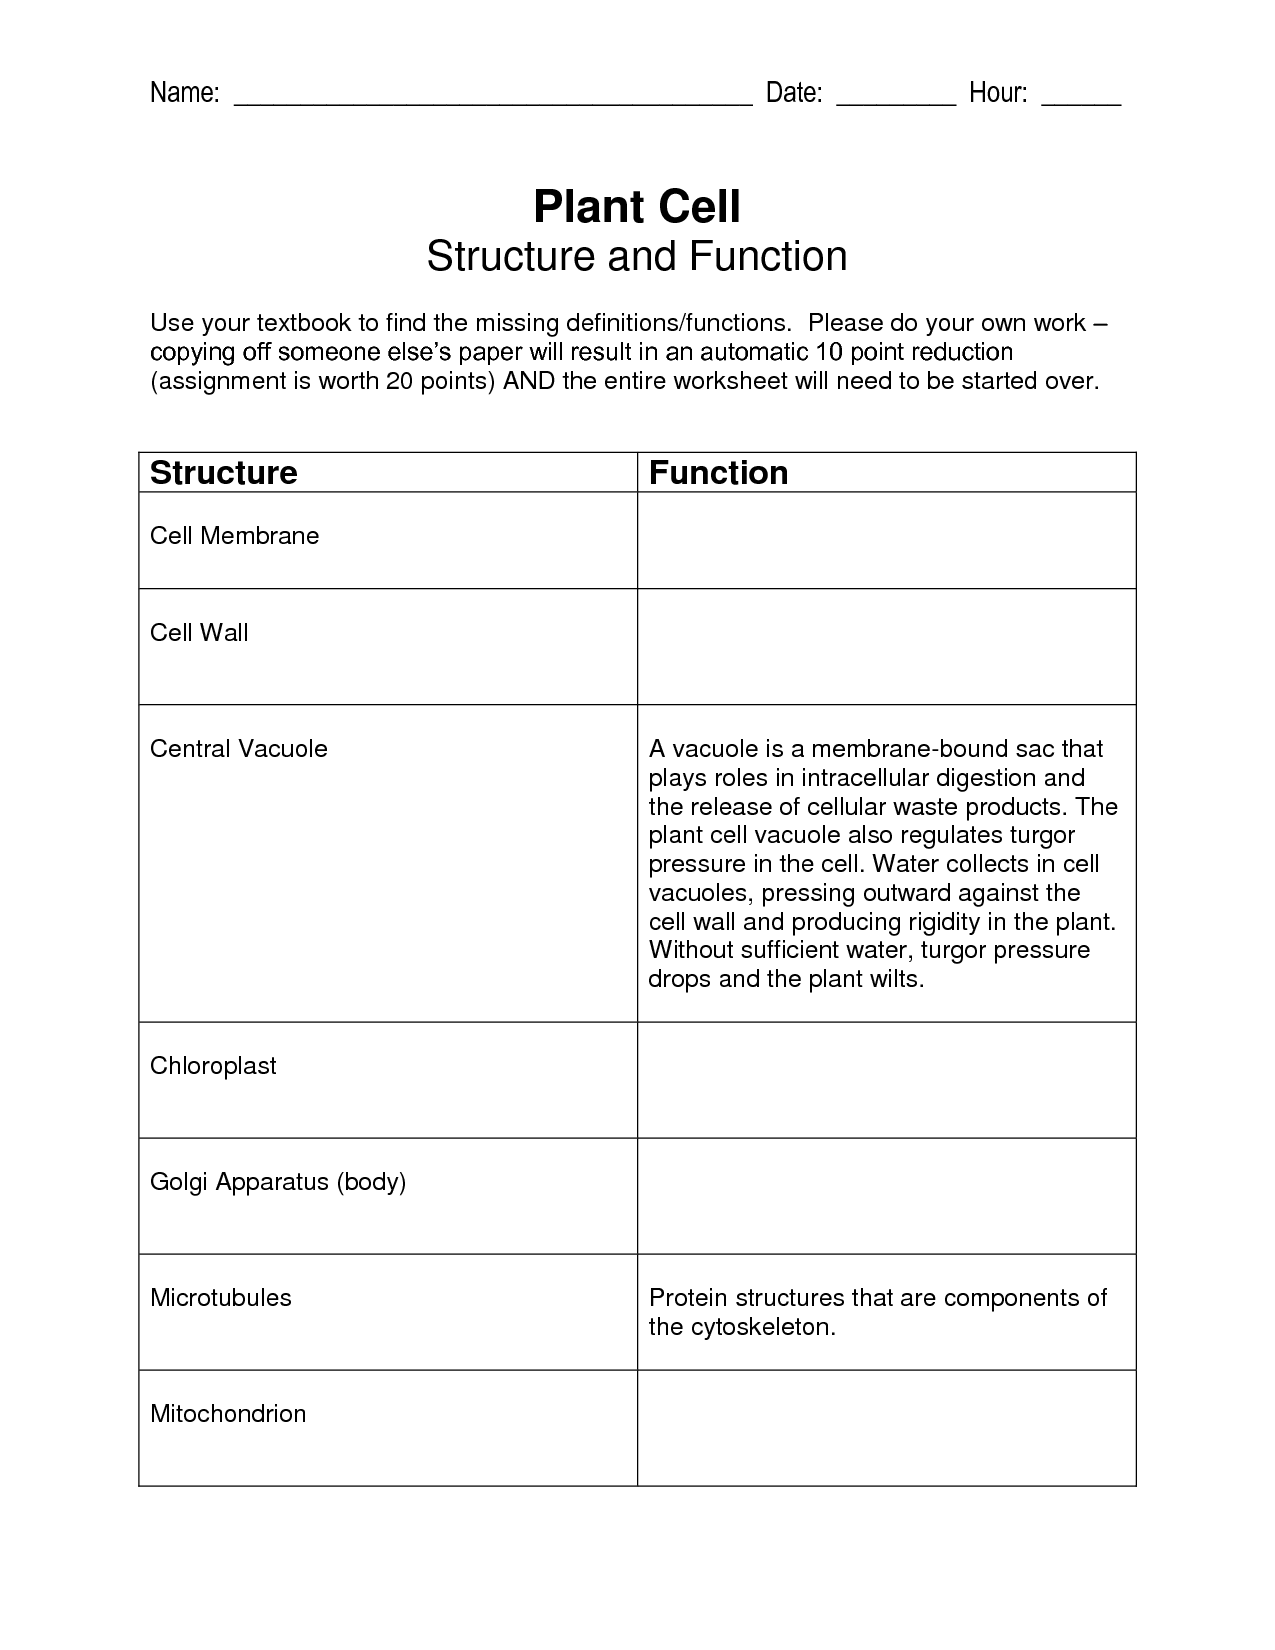 Plant Cell Structure and Function Chart Image